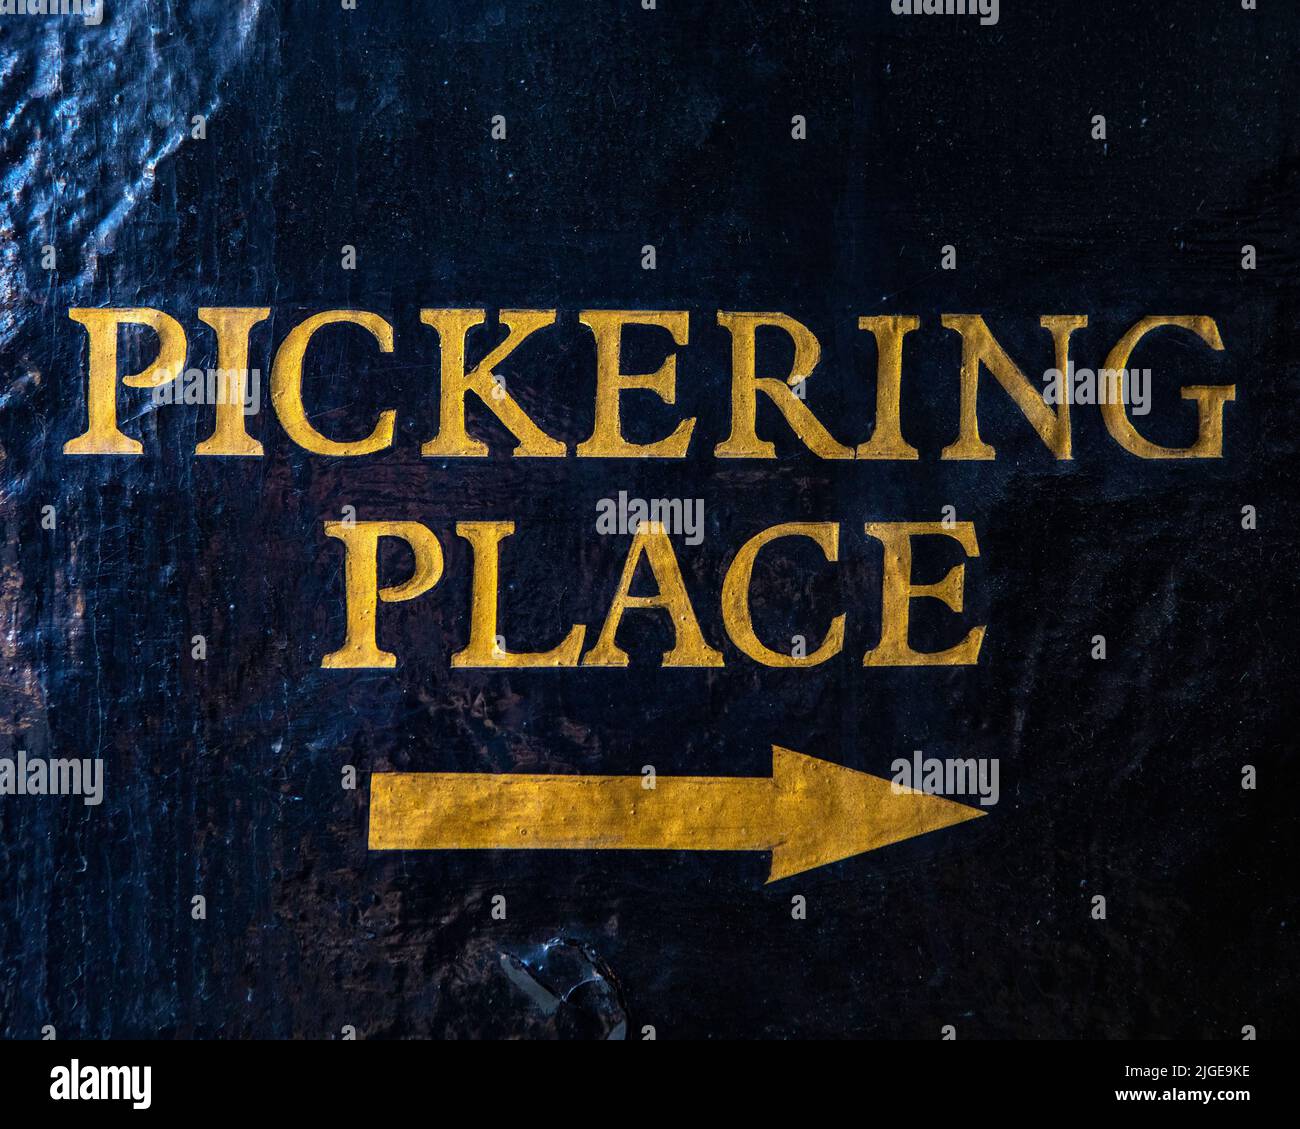 A direction sign for Pickering Place in London, UK - known for being the smallest square in London. Stock Photo